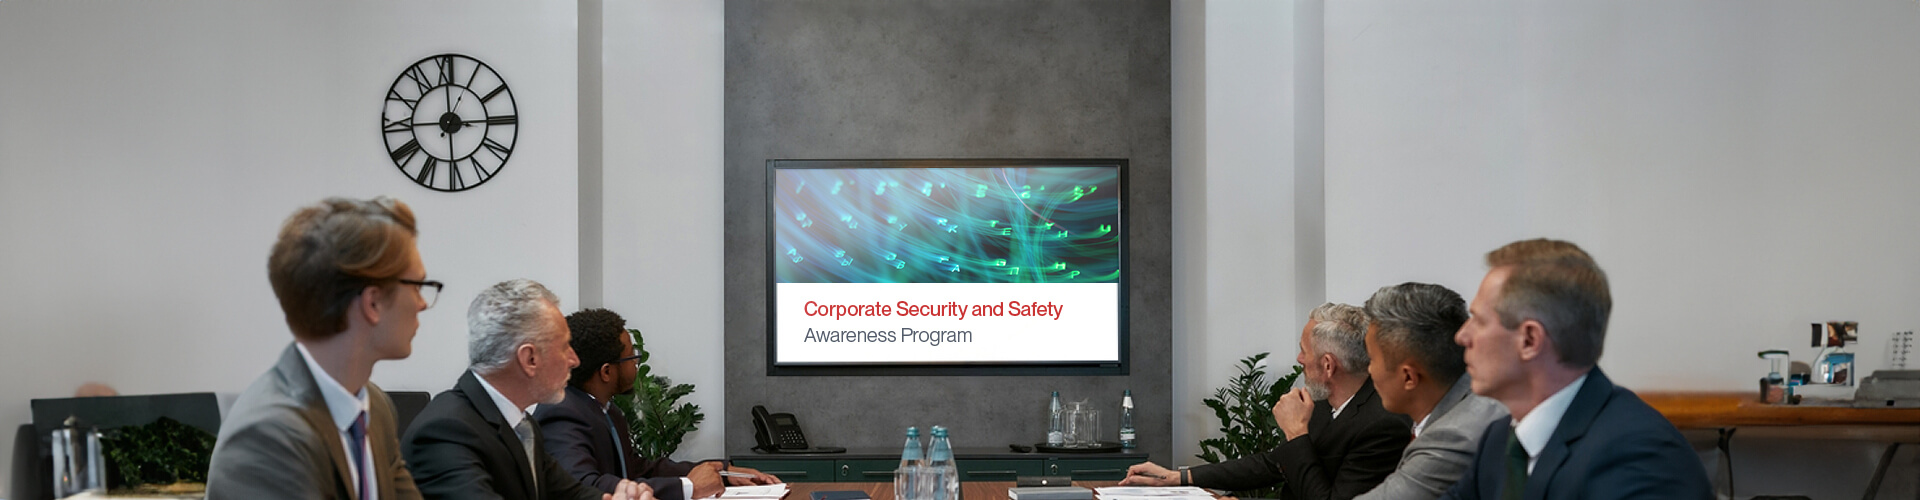 A Comprehensive Approach to Corporate Security and Safety Awareness Training Program for Employees